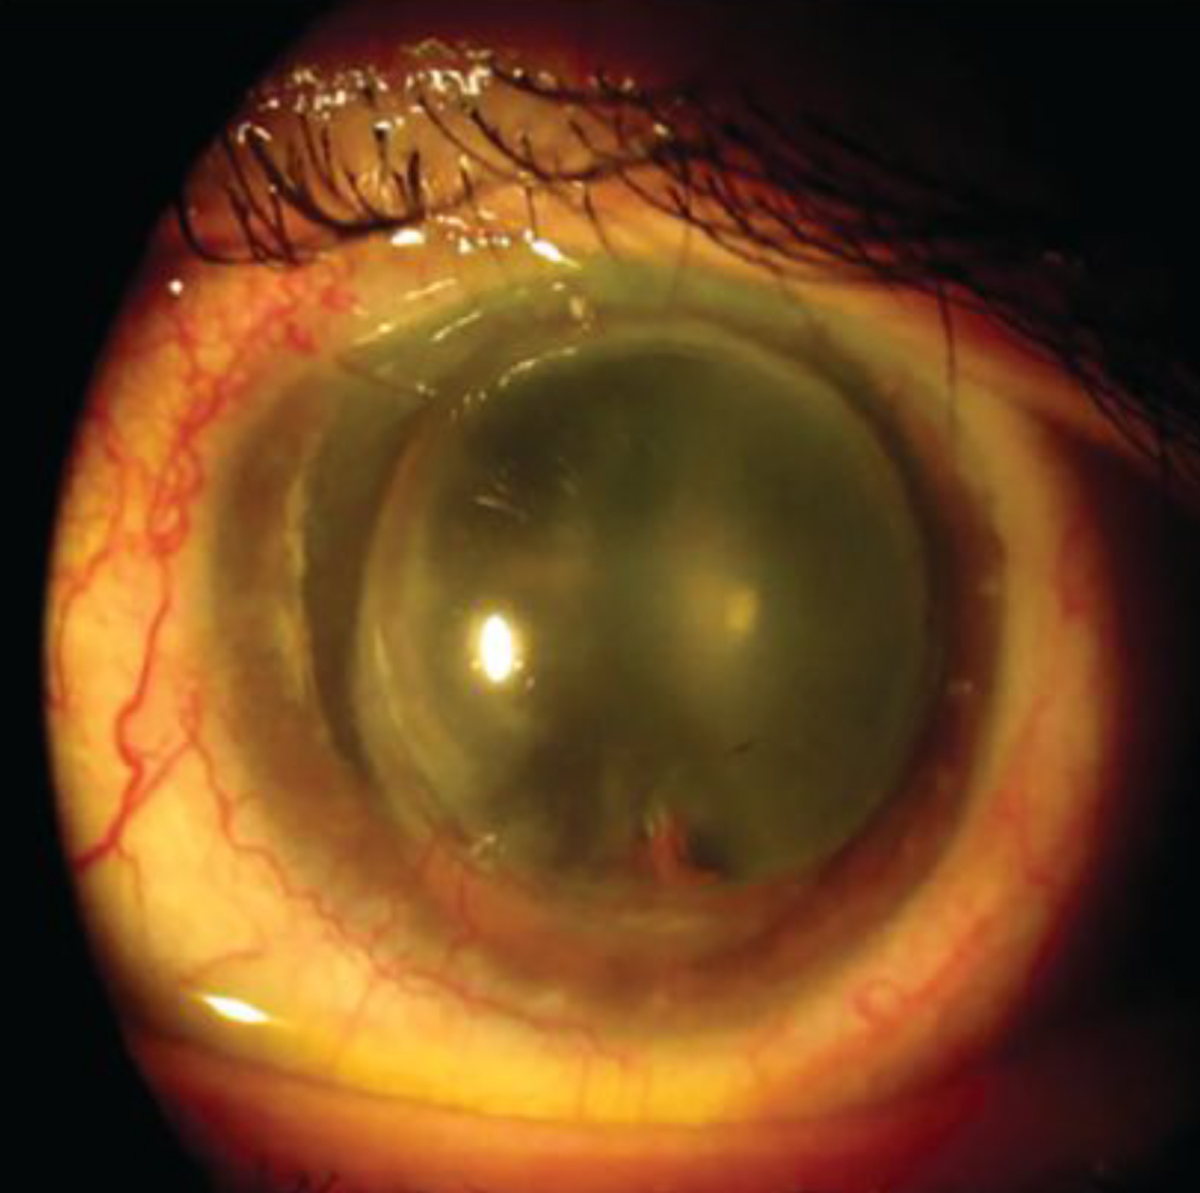 Fig. 7. A steeper profile inferior nasally in the left eye post-PKP.